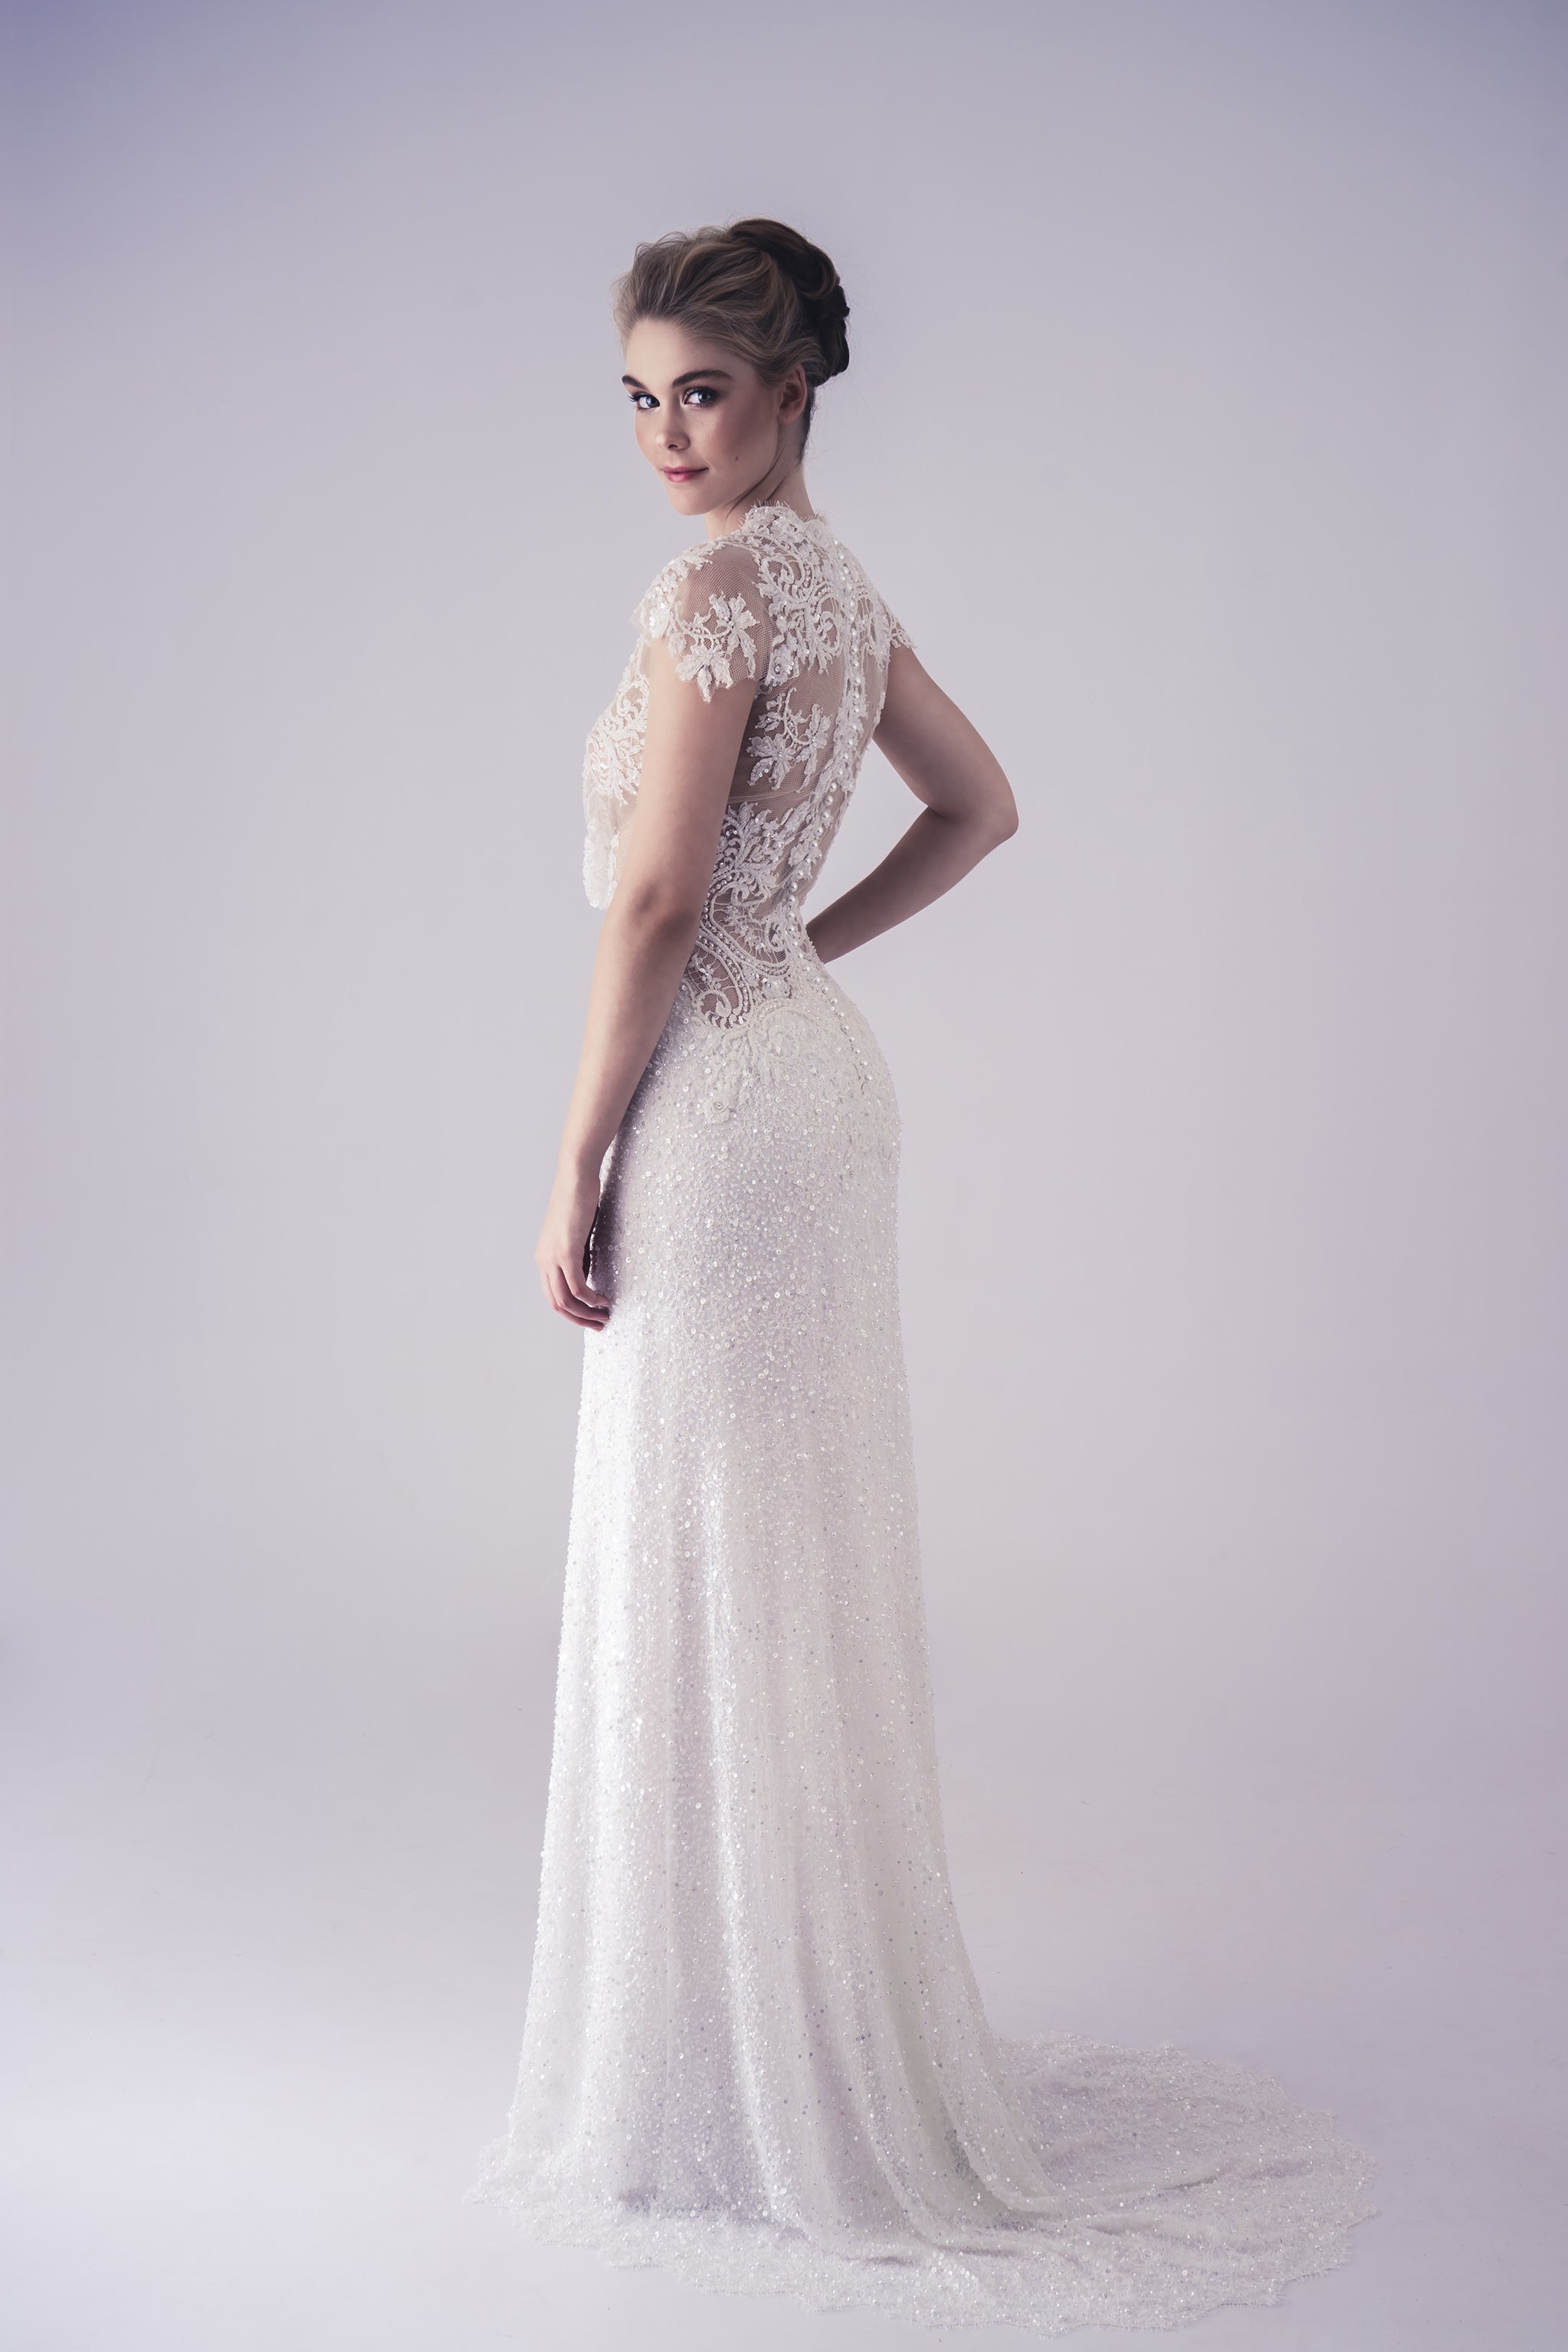 white fitted wedding gown with beaded lace design